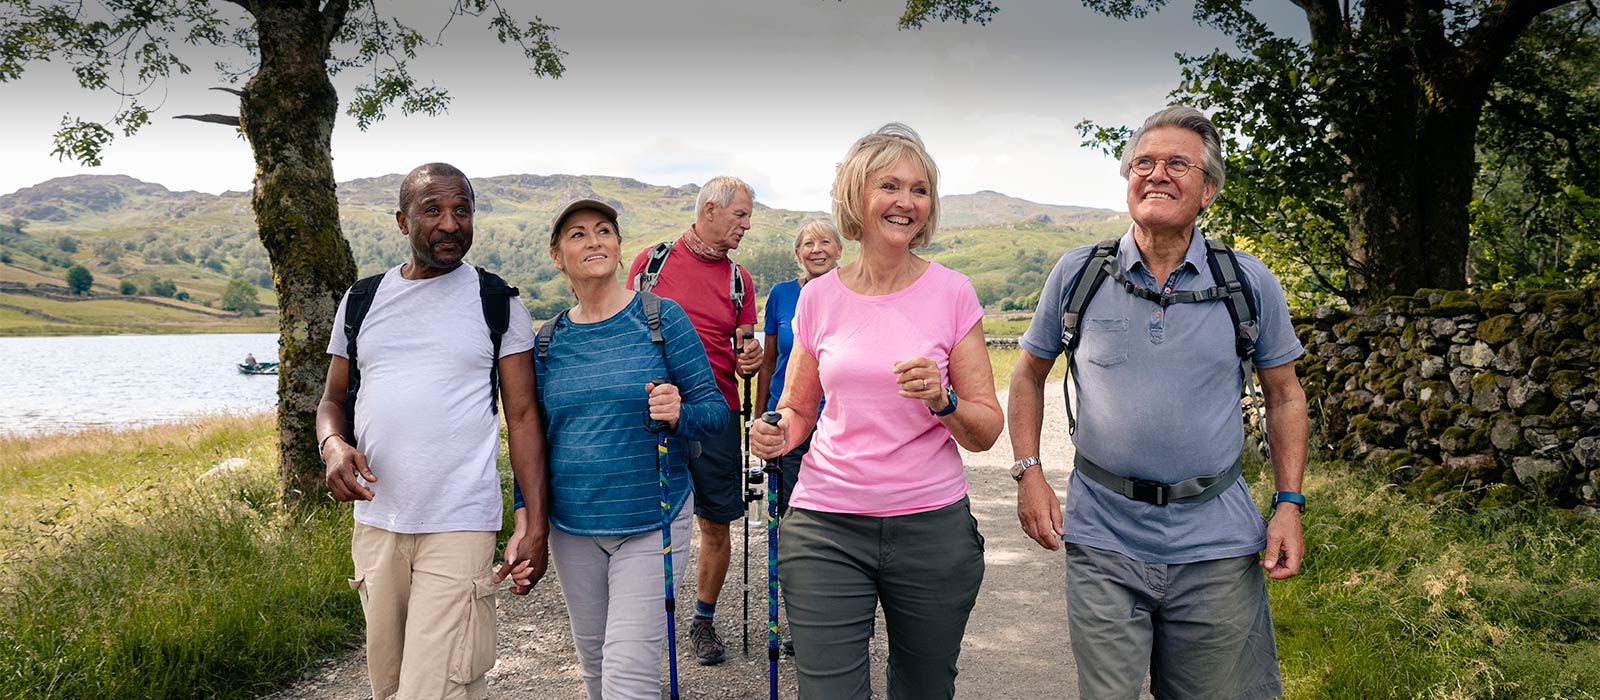 Group of senior couples walking on trail